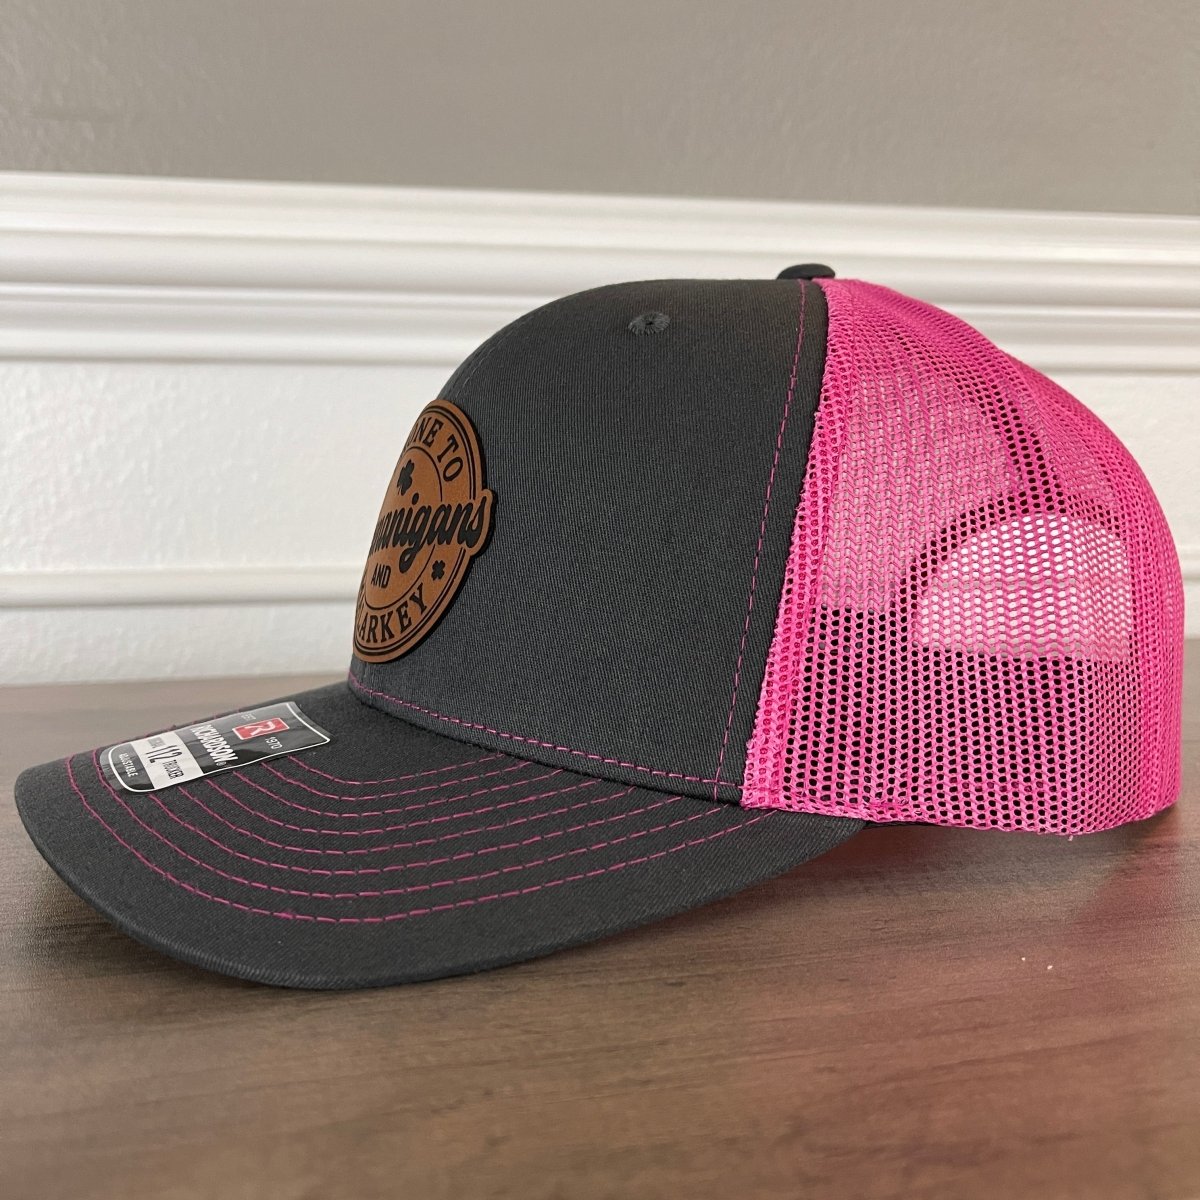 Prone To Shenanigans And Malarkey St. Patrick's Day Funny Front Leather Patch Hat Pink Patch Hat - VividEditions